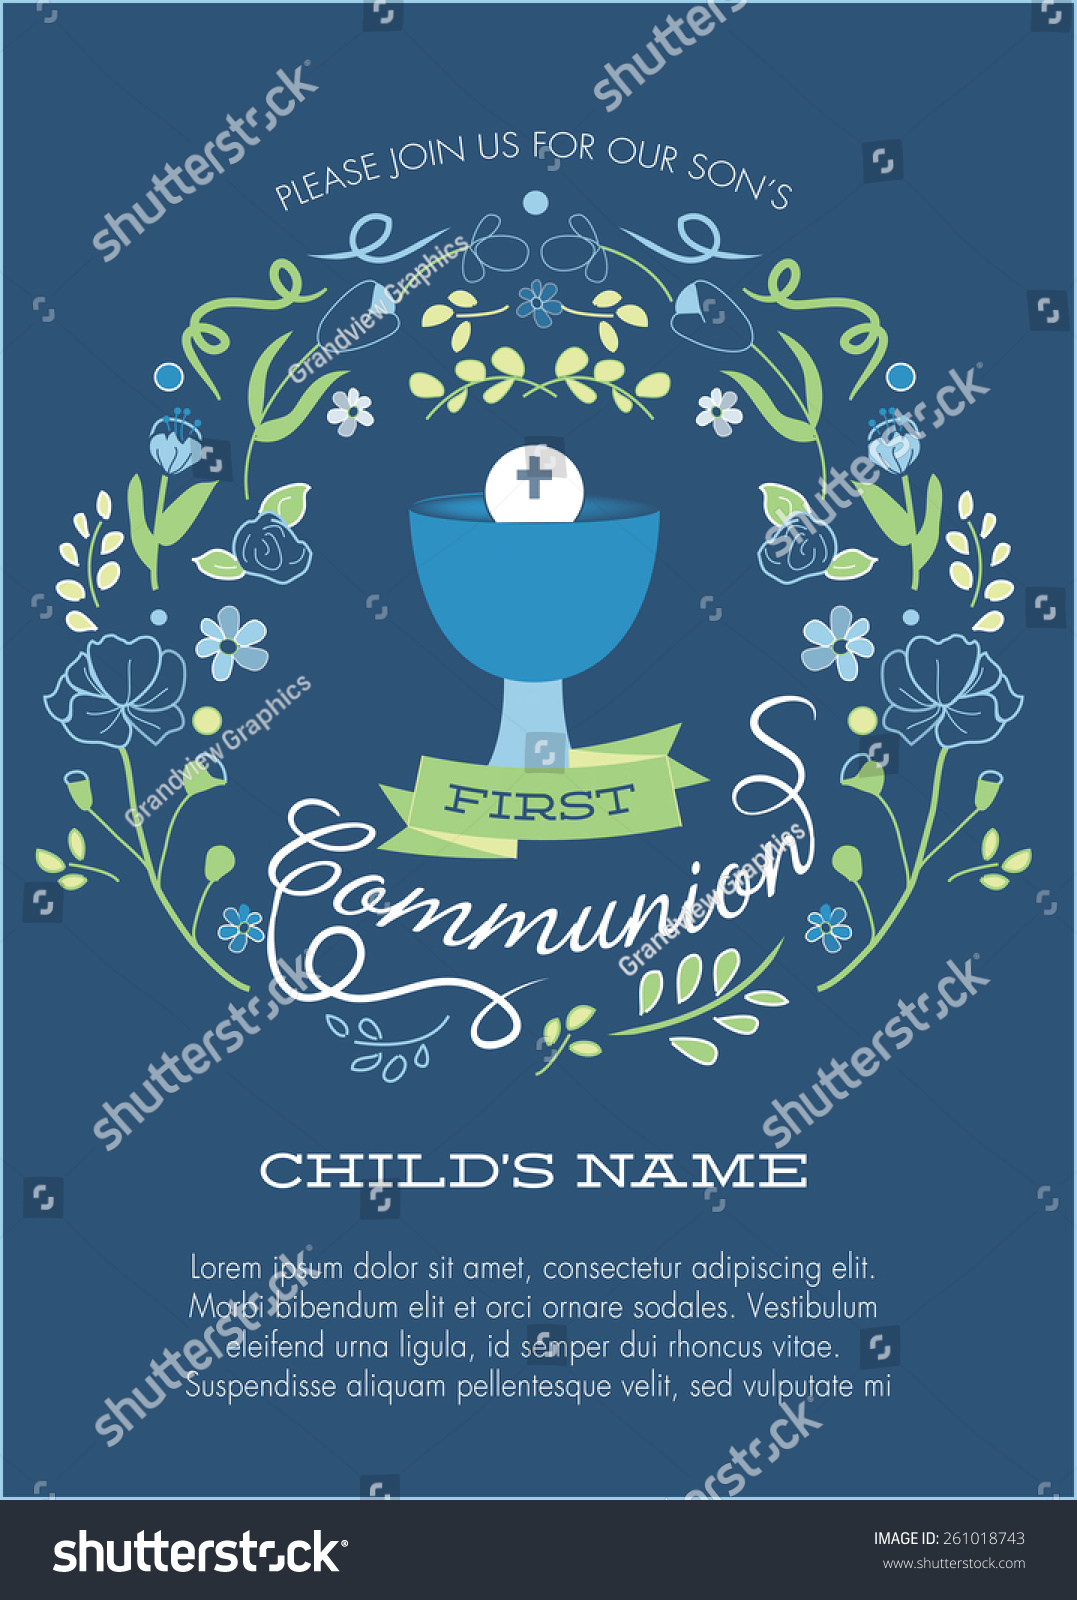 SVG of Navy Blue and Green Boy's First Holy Communion Invitation with Chalice and Flowers - Vector  svg